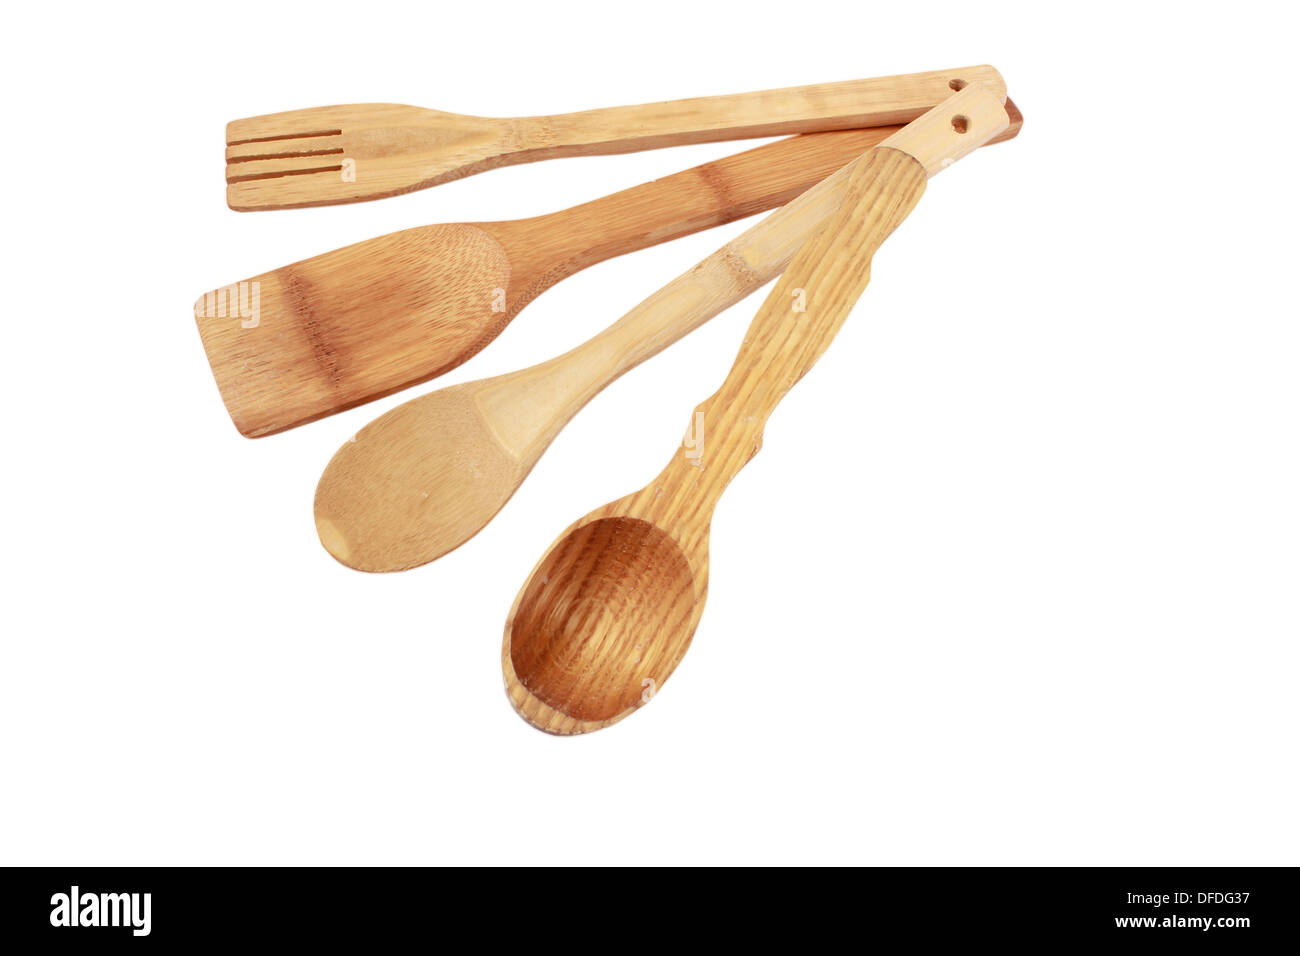 Brown, Cooking, Carved, Craft, Dish, Empty, Equipment, Food &, Fork, Isolated, Item, Healthy, Kitchen, Life, Material, Natural, Stock Photo